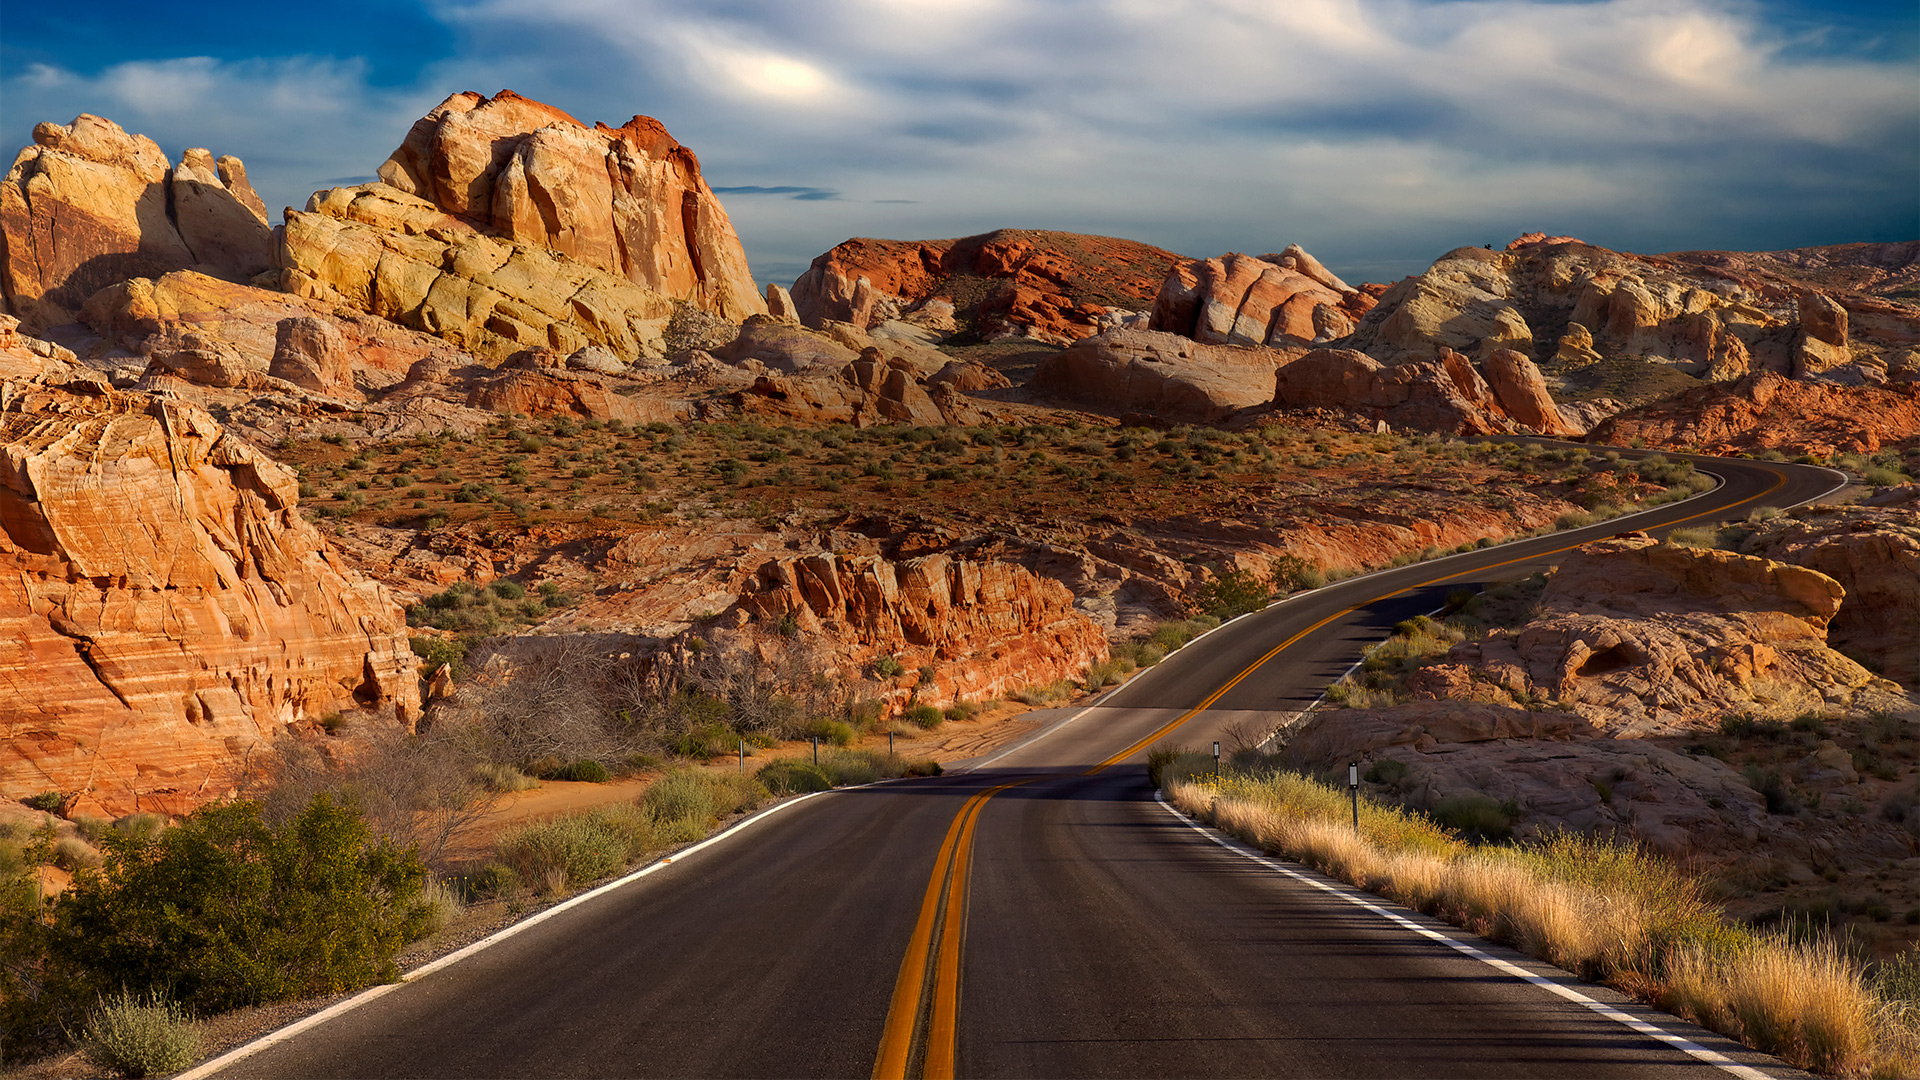 General 1920x1080 road clouds nature landscape plants mountains hairpin turns sky desert Valley of Fire State Park Nevada USA rocks rock formation outdoors Mojave Desert